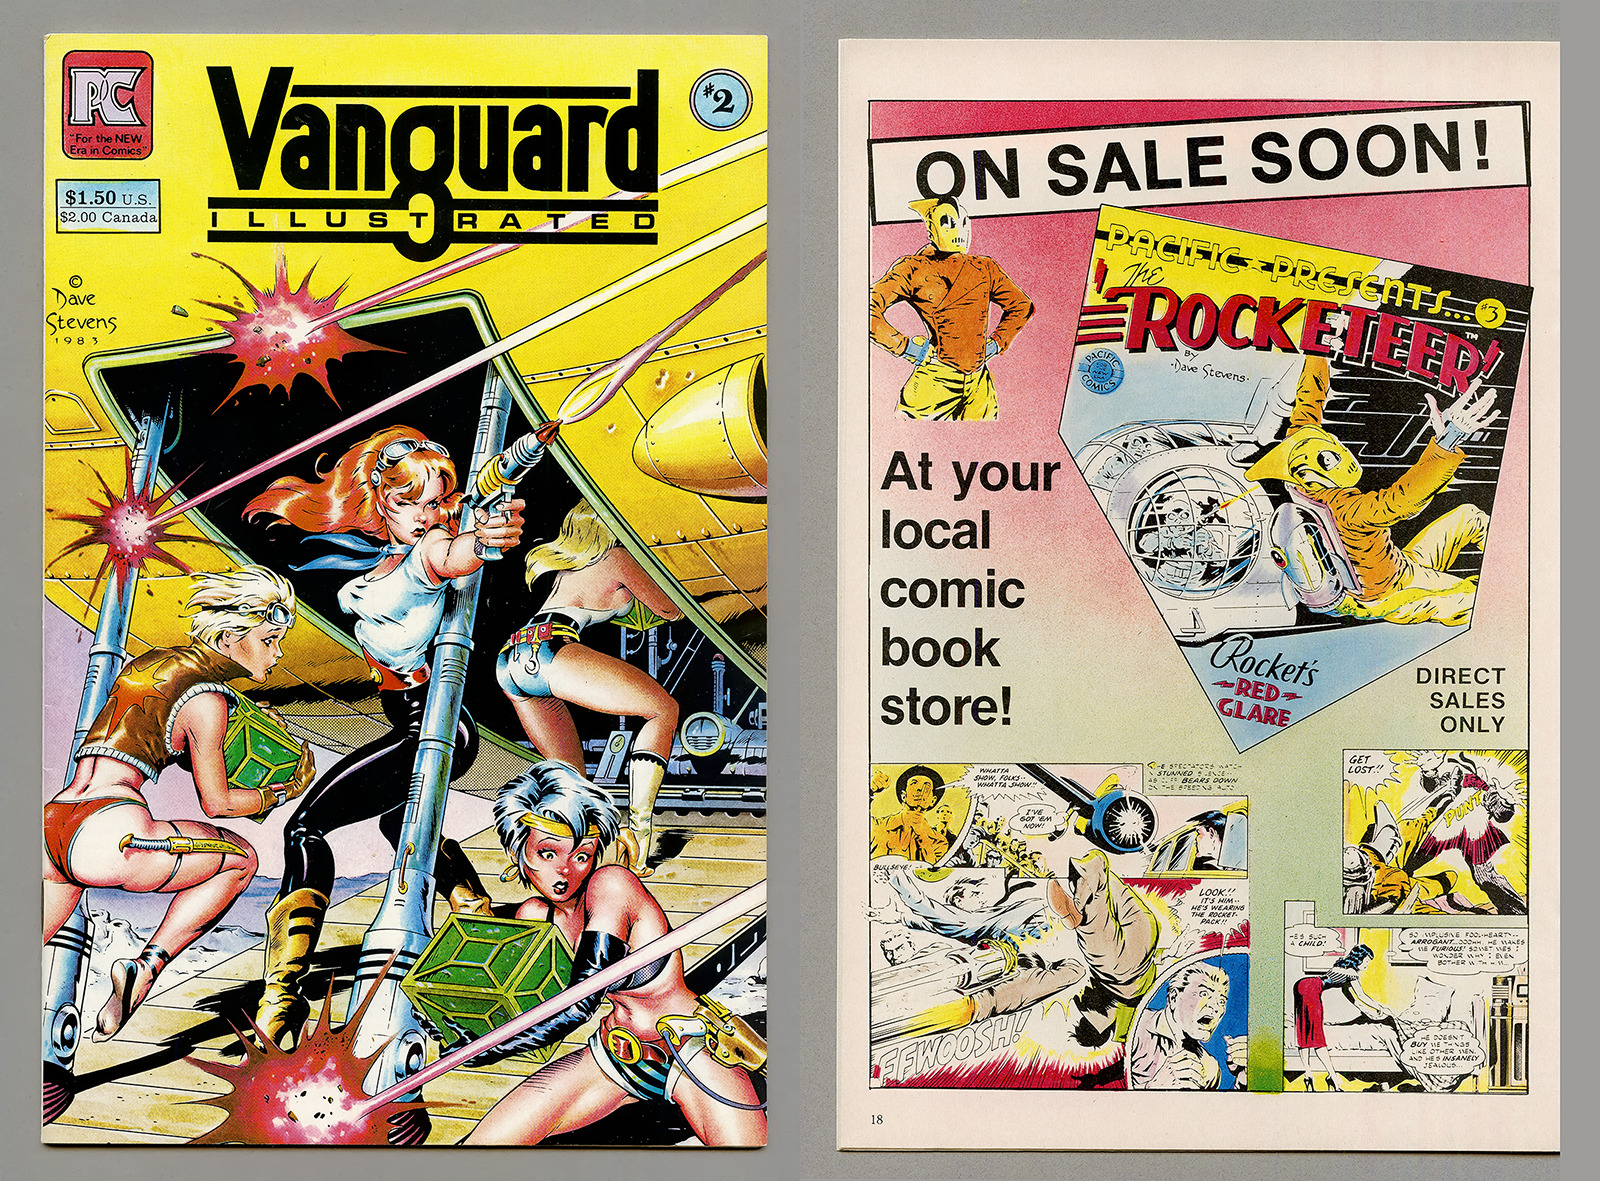 VANGUARD ILLUSTRATED #2 AD FOR PACIFIC PRESENTS #3 WITH DAVE STEVENS COVER